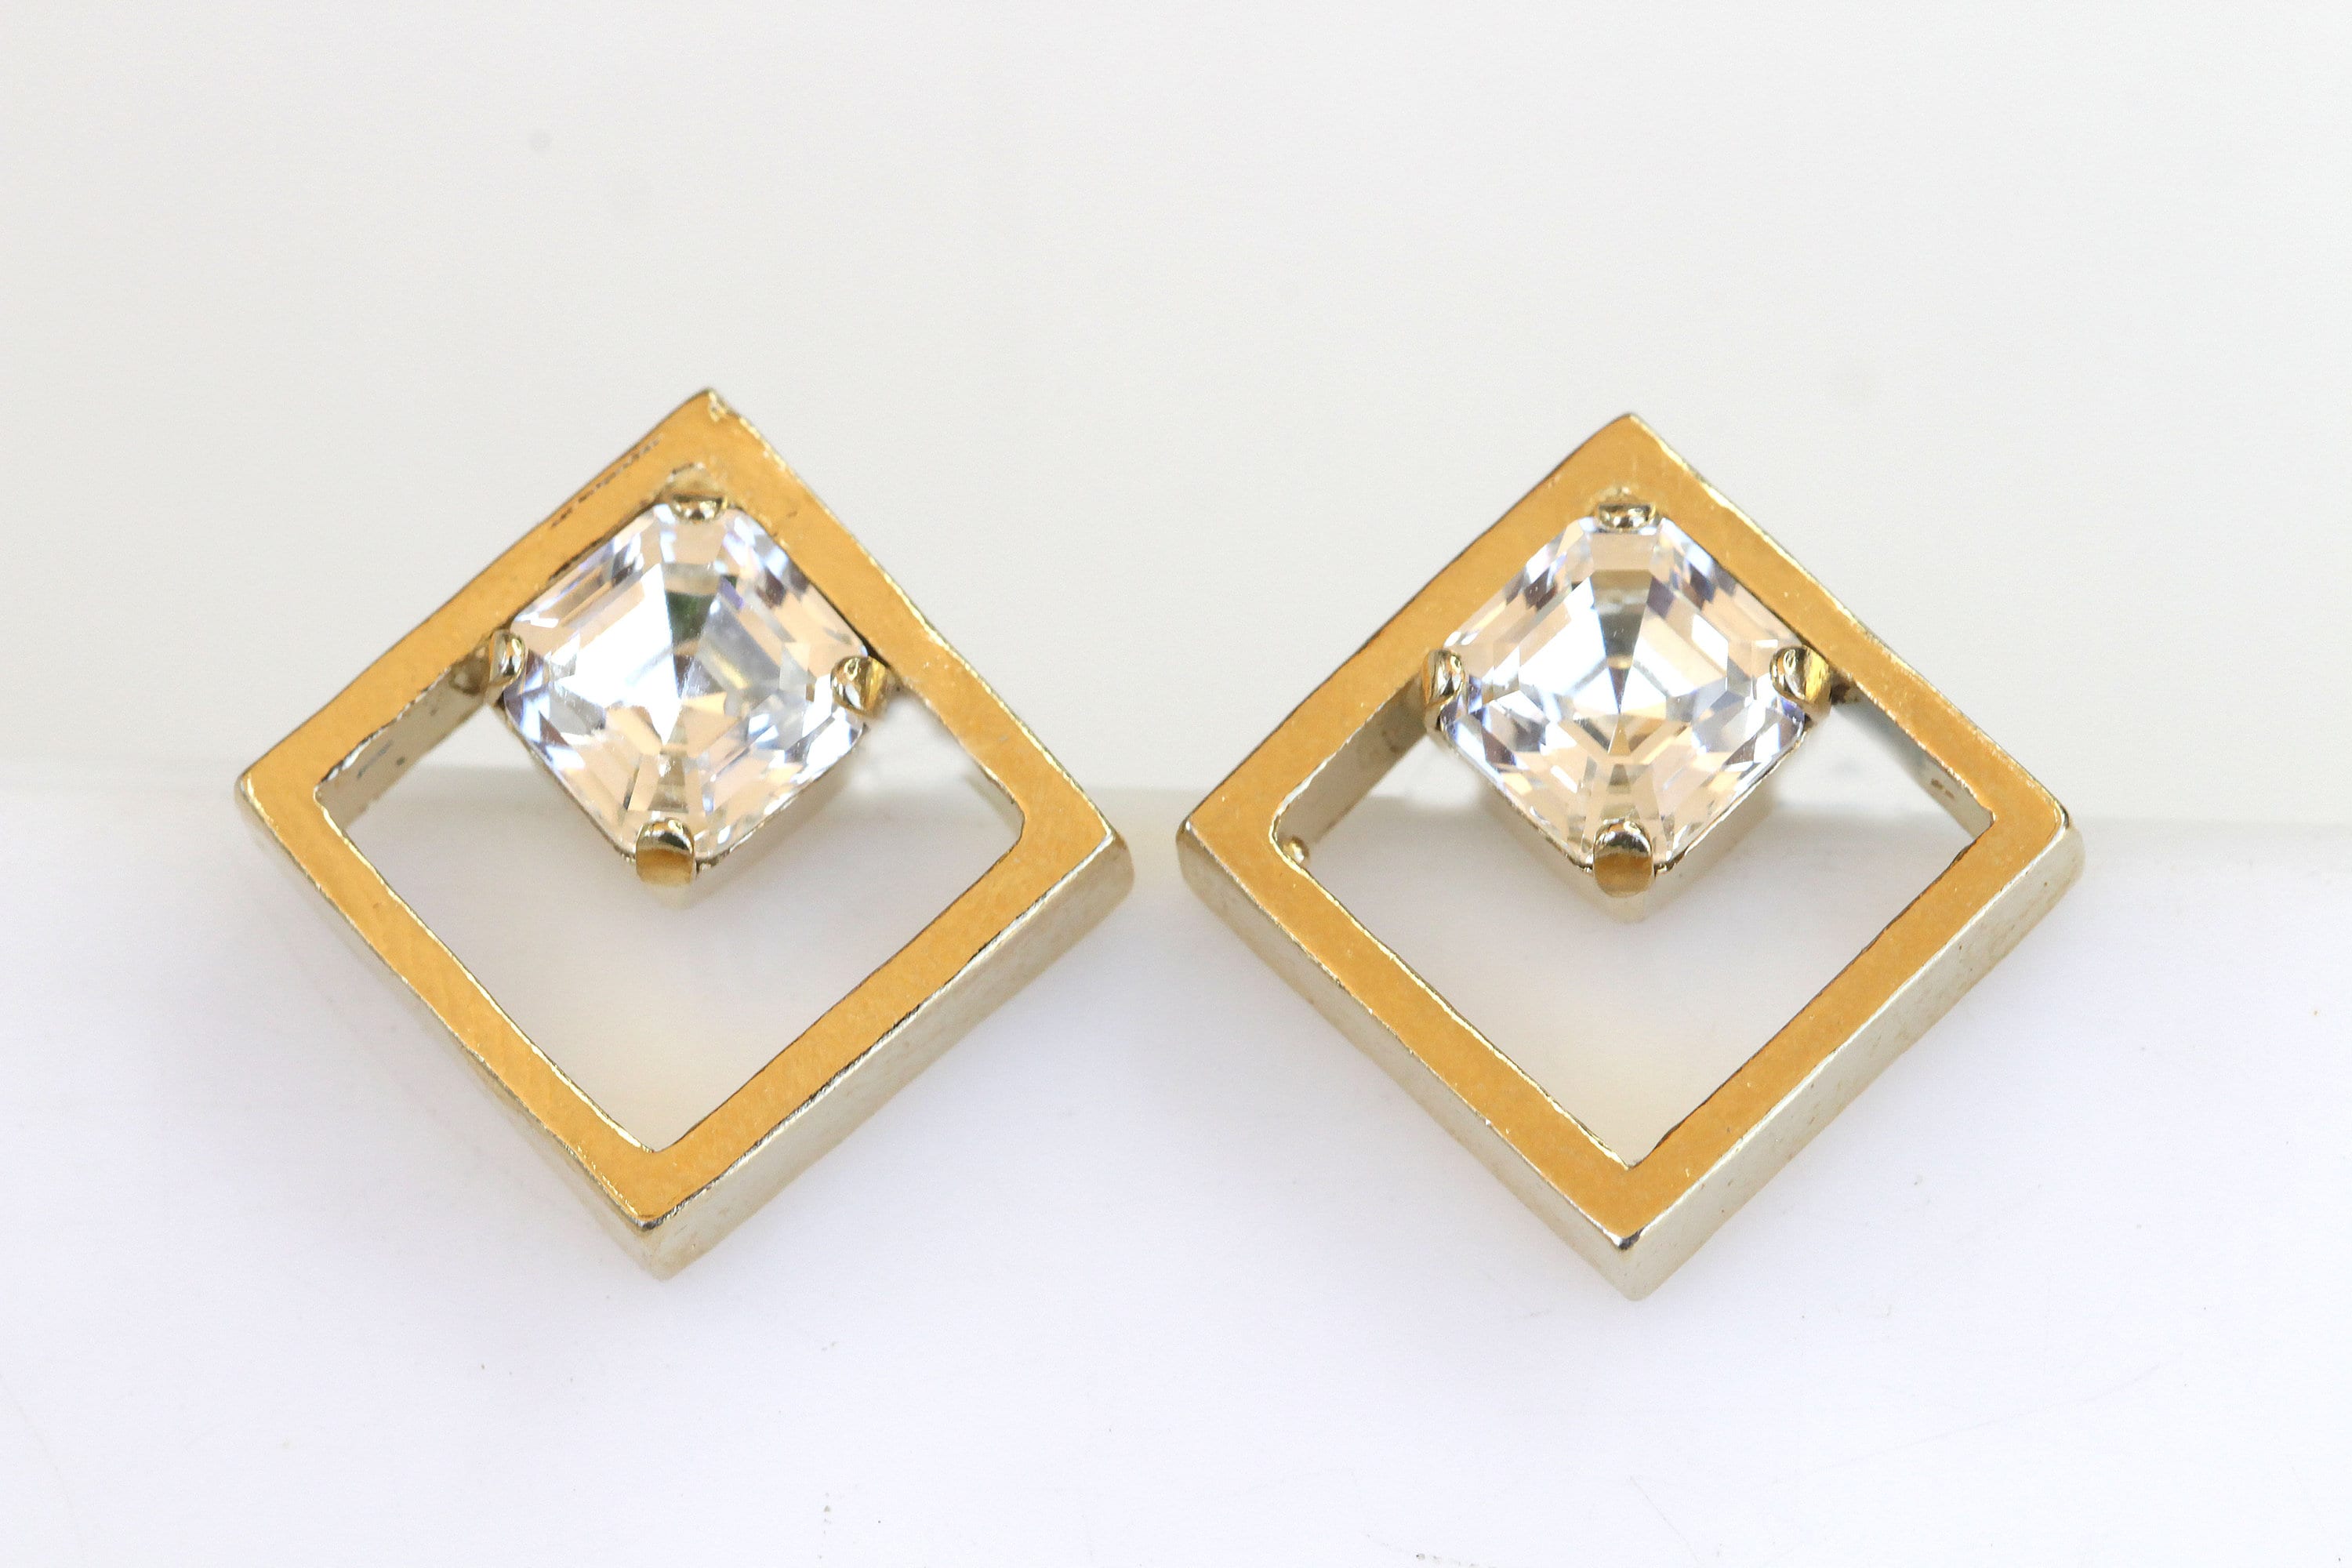 0.26Ct Natural Round White Diamond Square Shape Stud Earrings in 10K Yellow  Gold | eBay